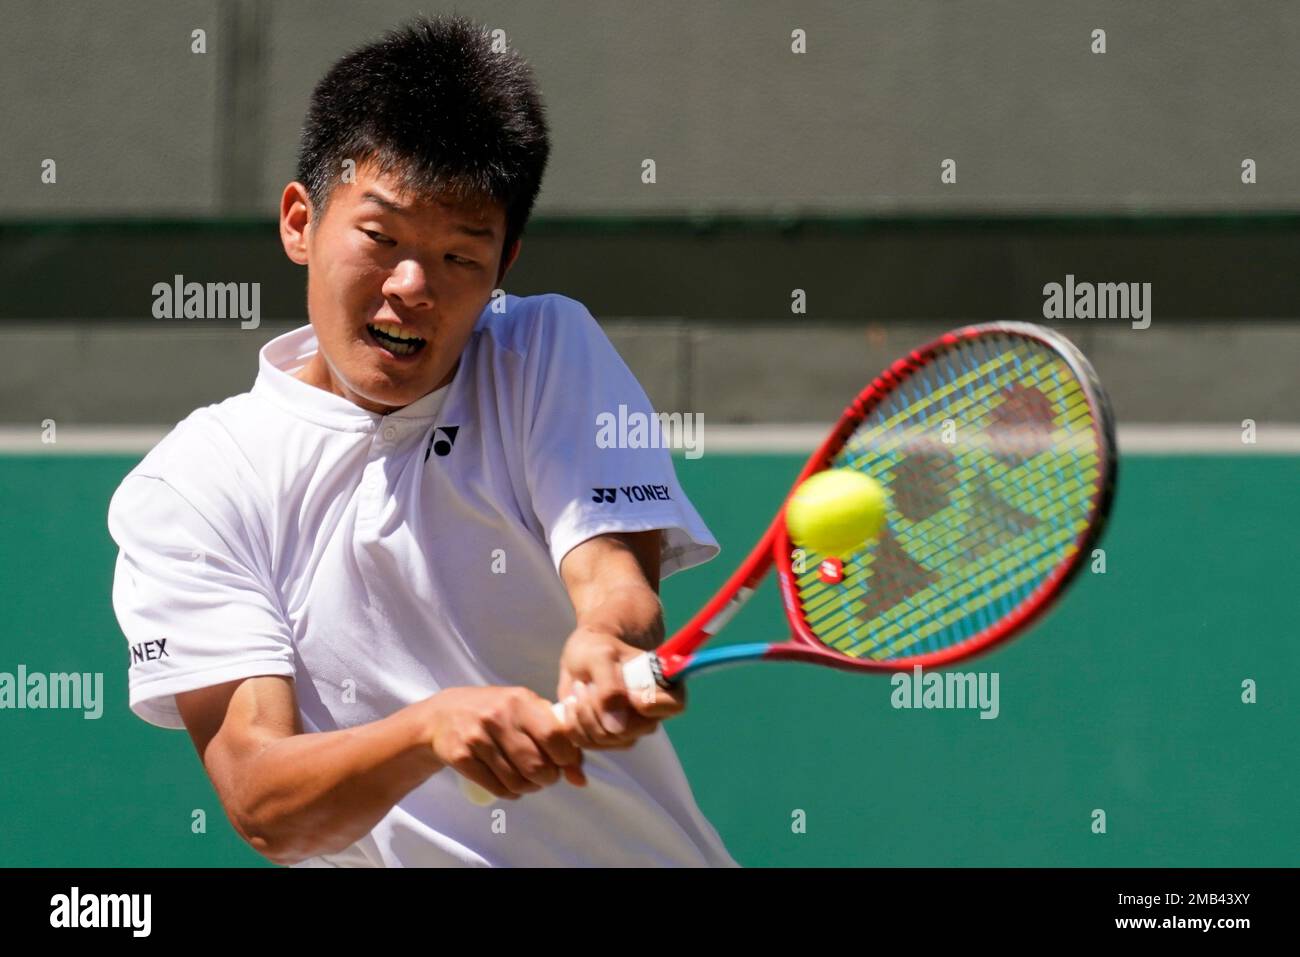 Michael Zheng of the United States returns to Croatias Mili Poljicak in the final of the boys singles on day fourteen of the Wimbledon tennis championships in London, Sunday, July 10, 2022